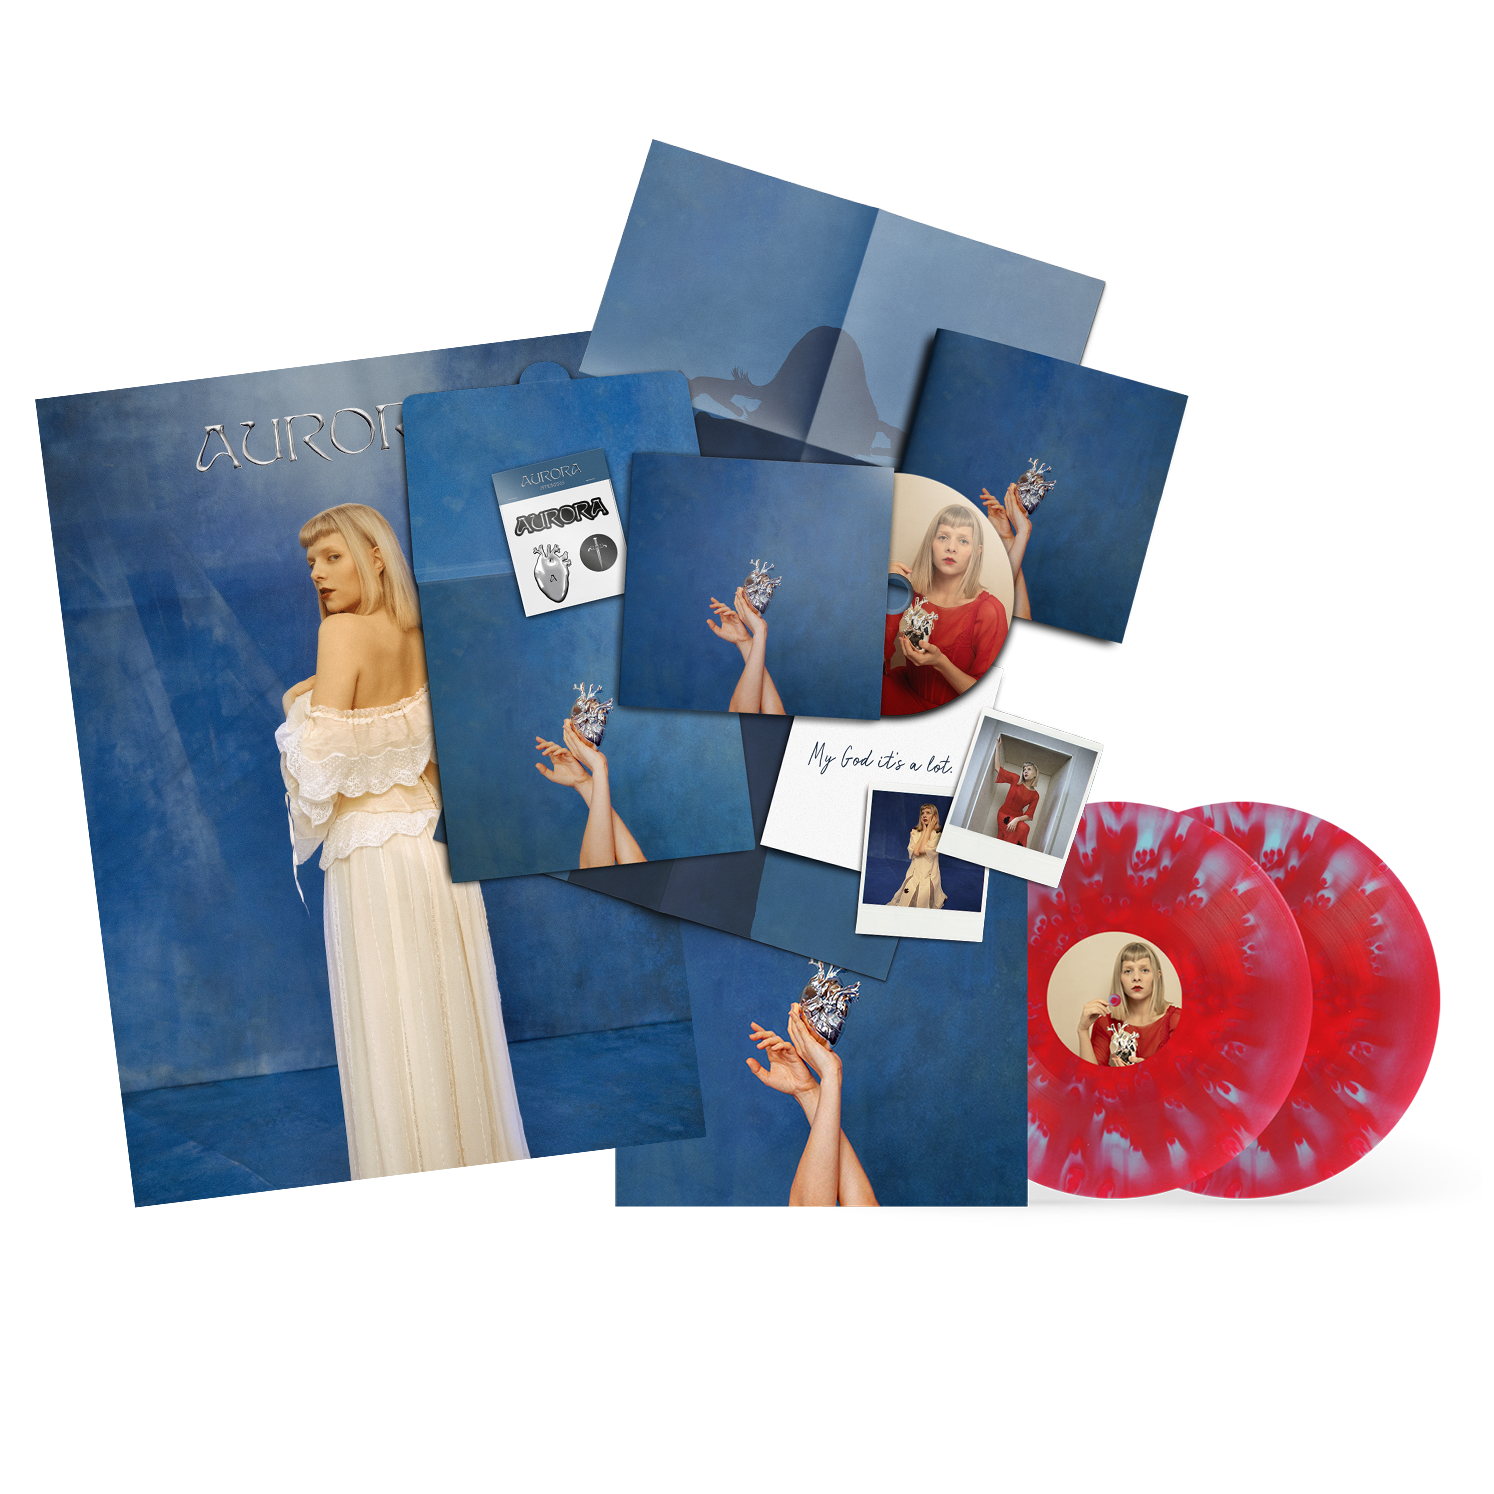 What Happened To The Heart? Exclusive Fanpack, Exclusive 2LP & Poster